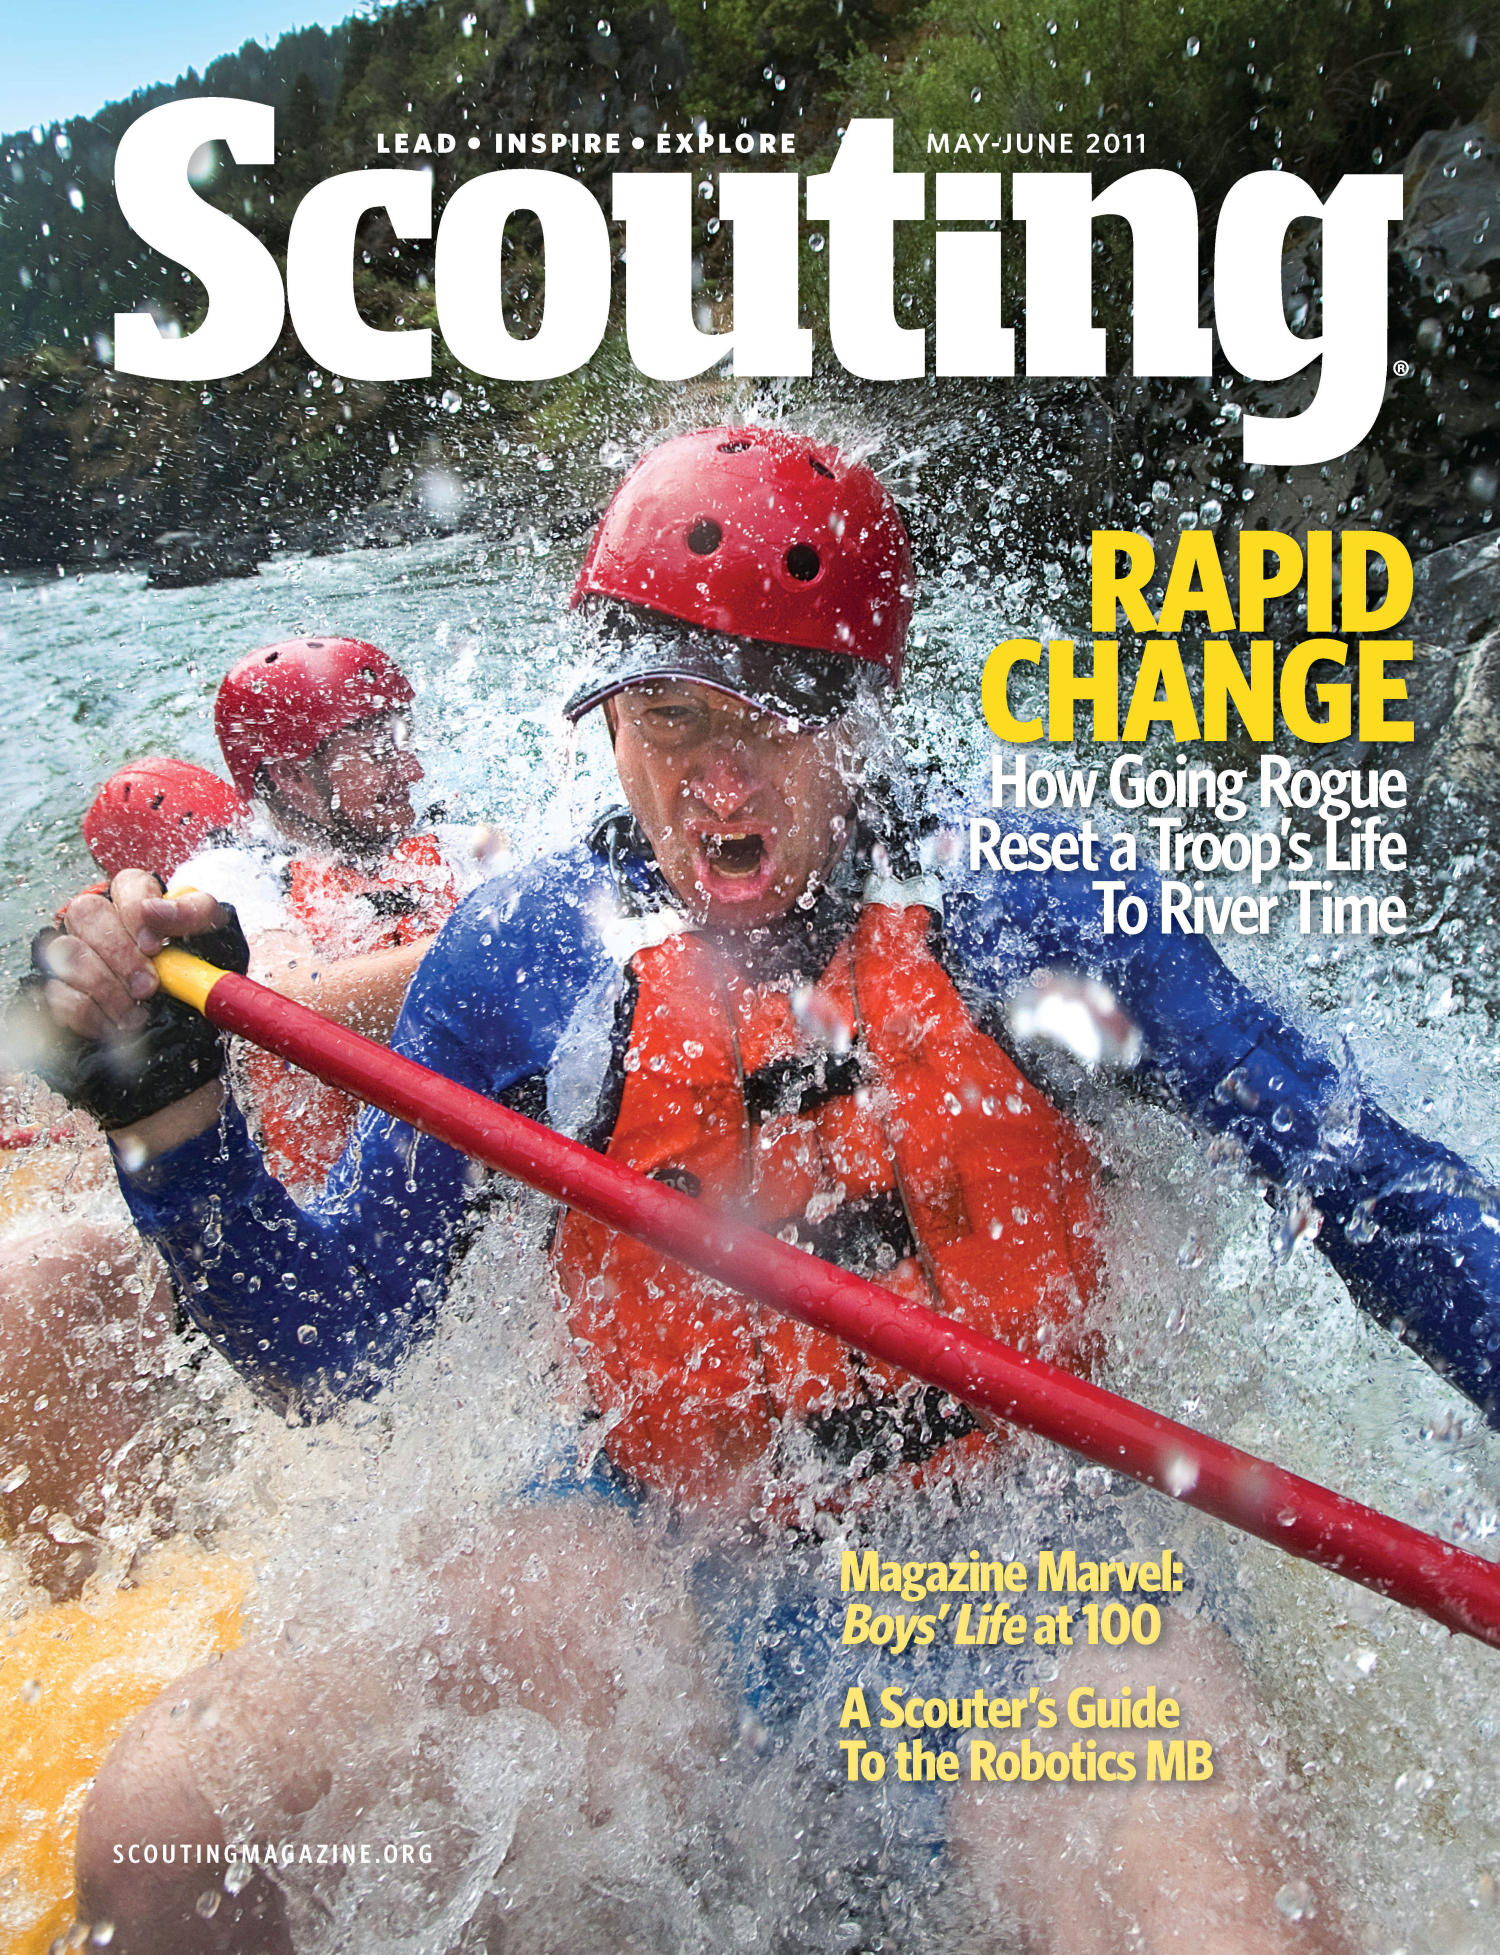 Scouting, Volume 99, Number 3, May-June 2011
                                                
                                                    Front Cover
                                                